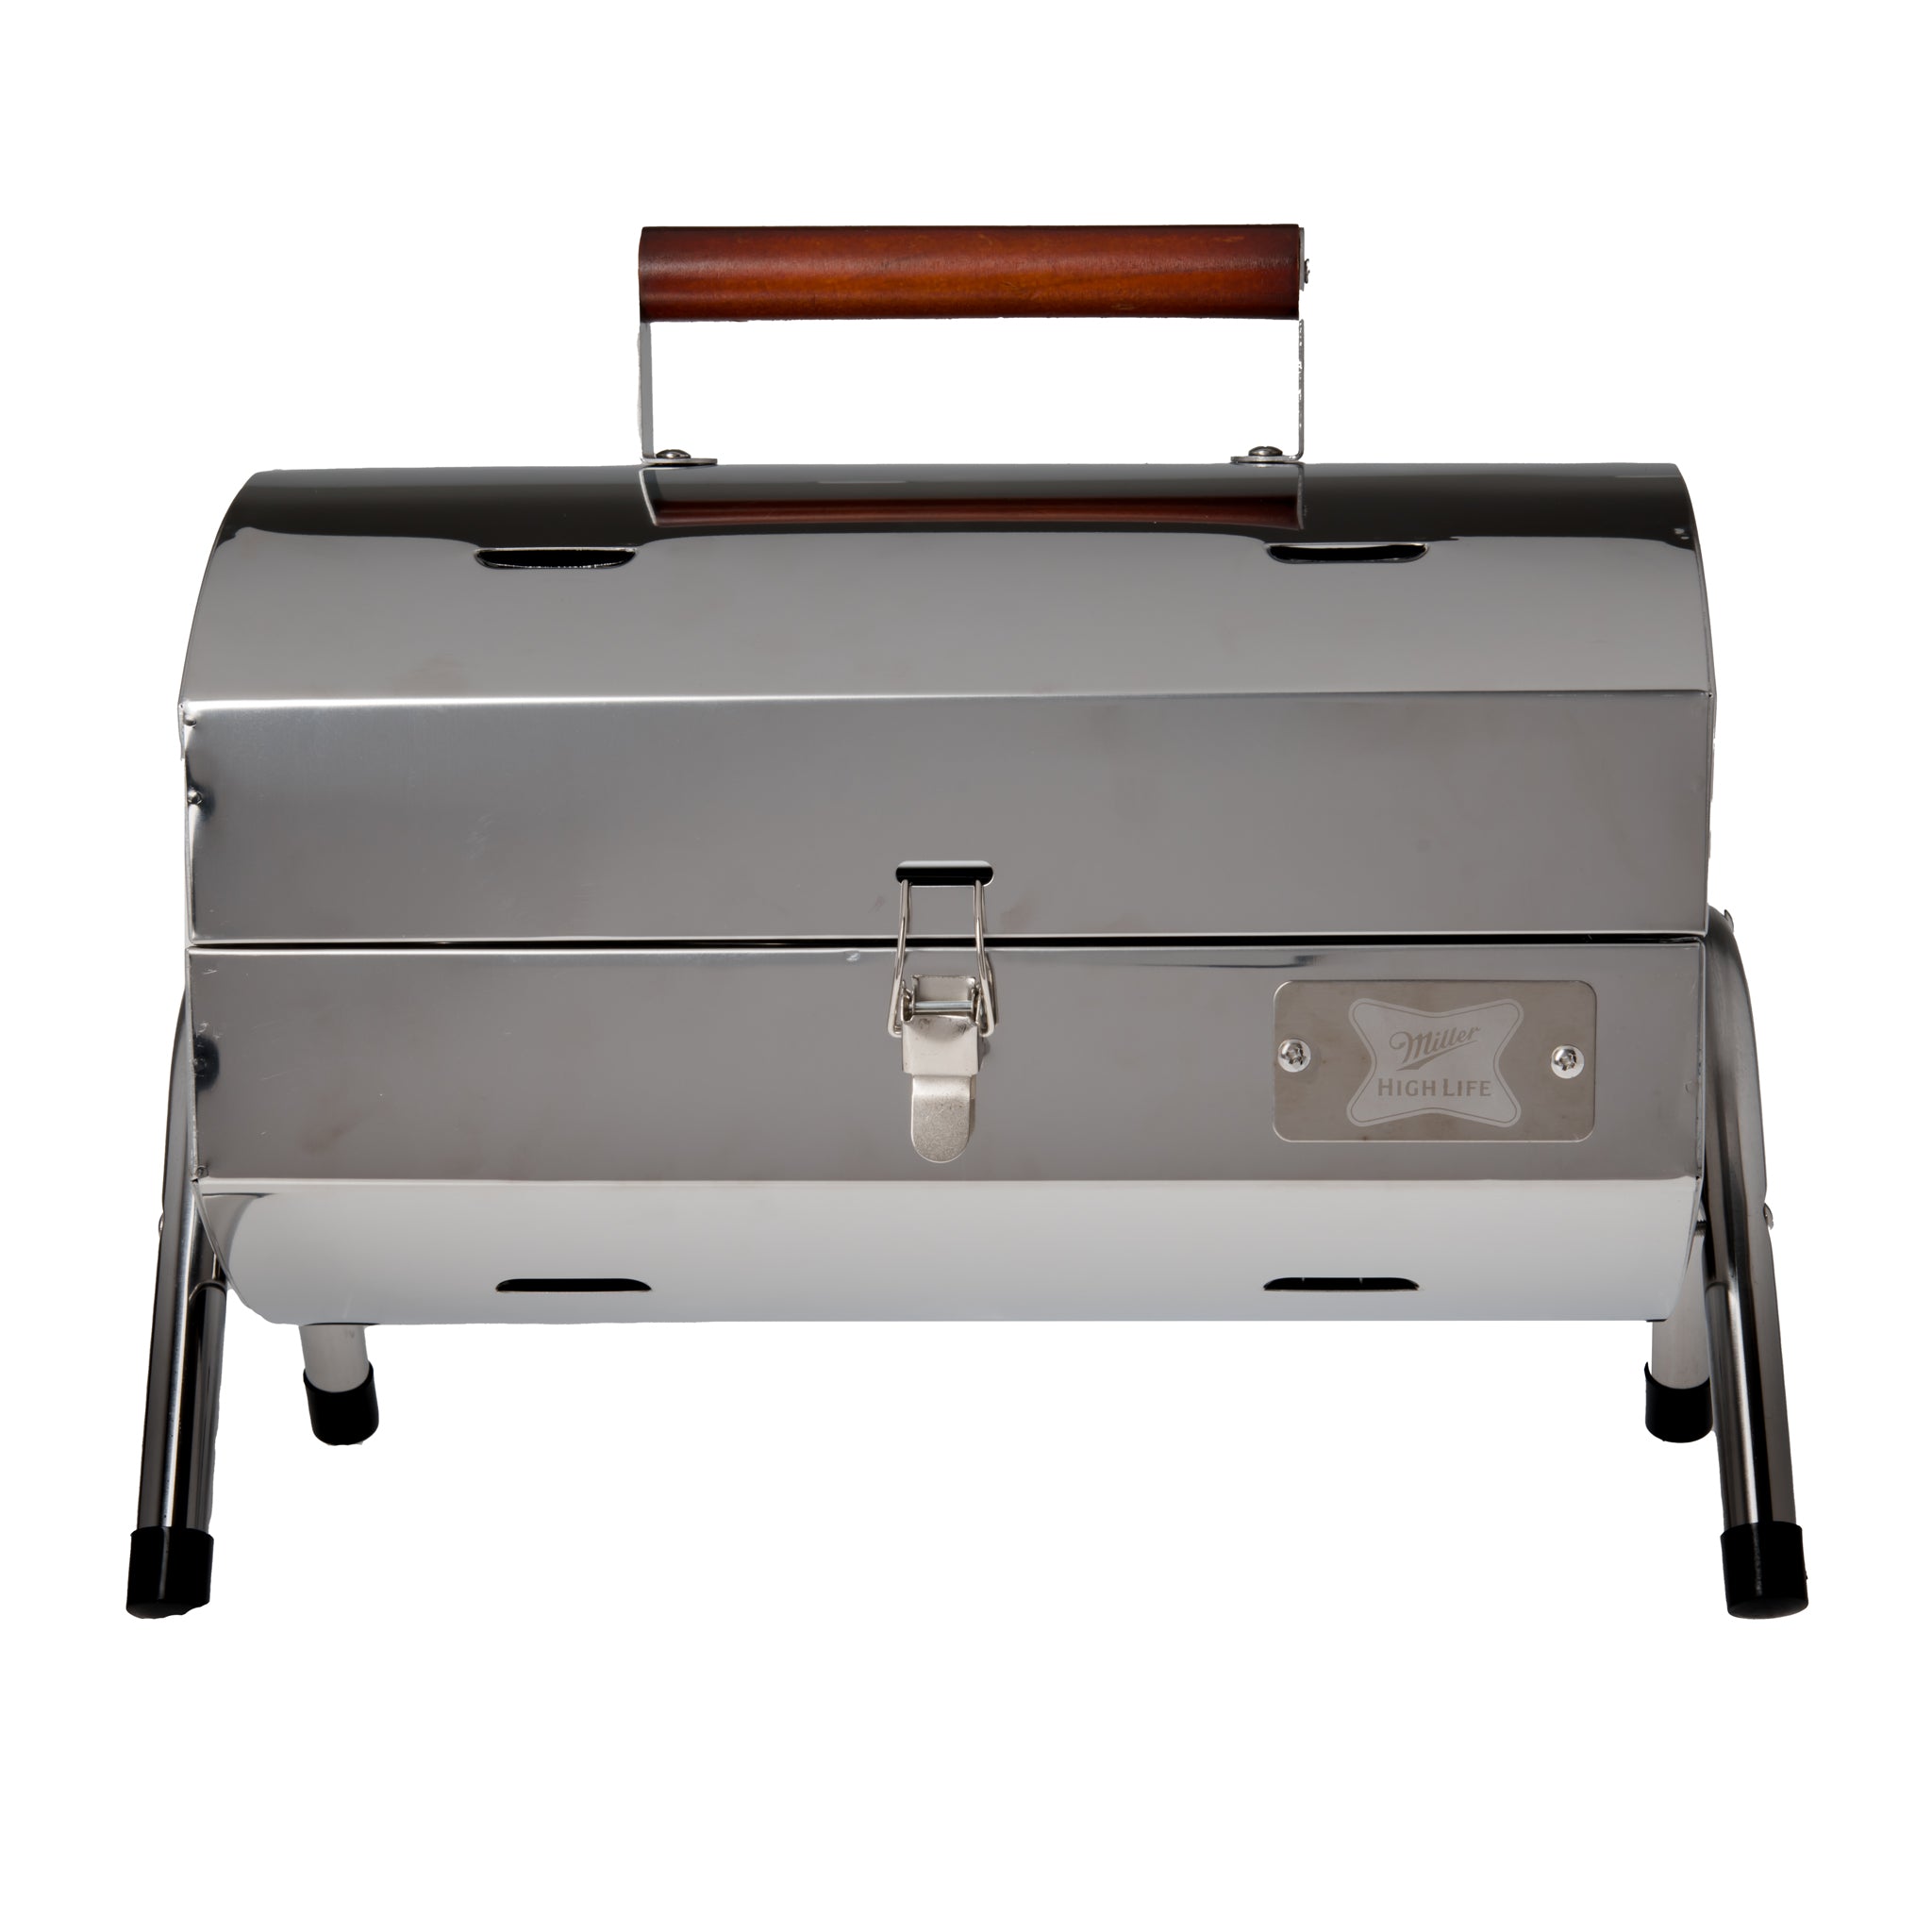 HIGH CHARCOAL GRILL – Miller High Life Shop